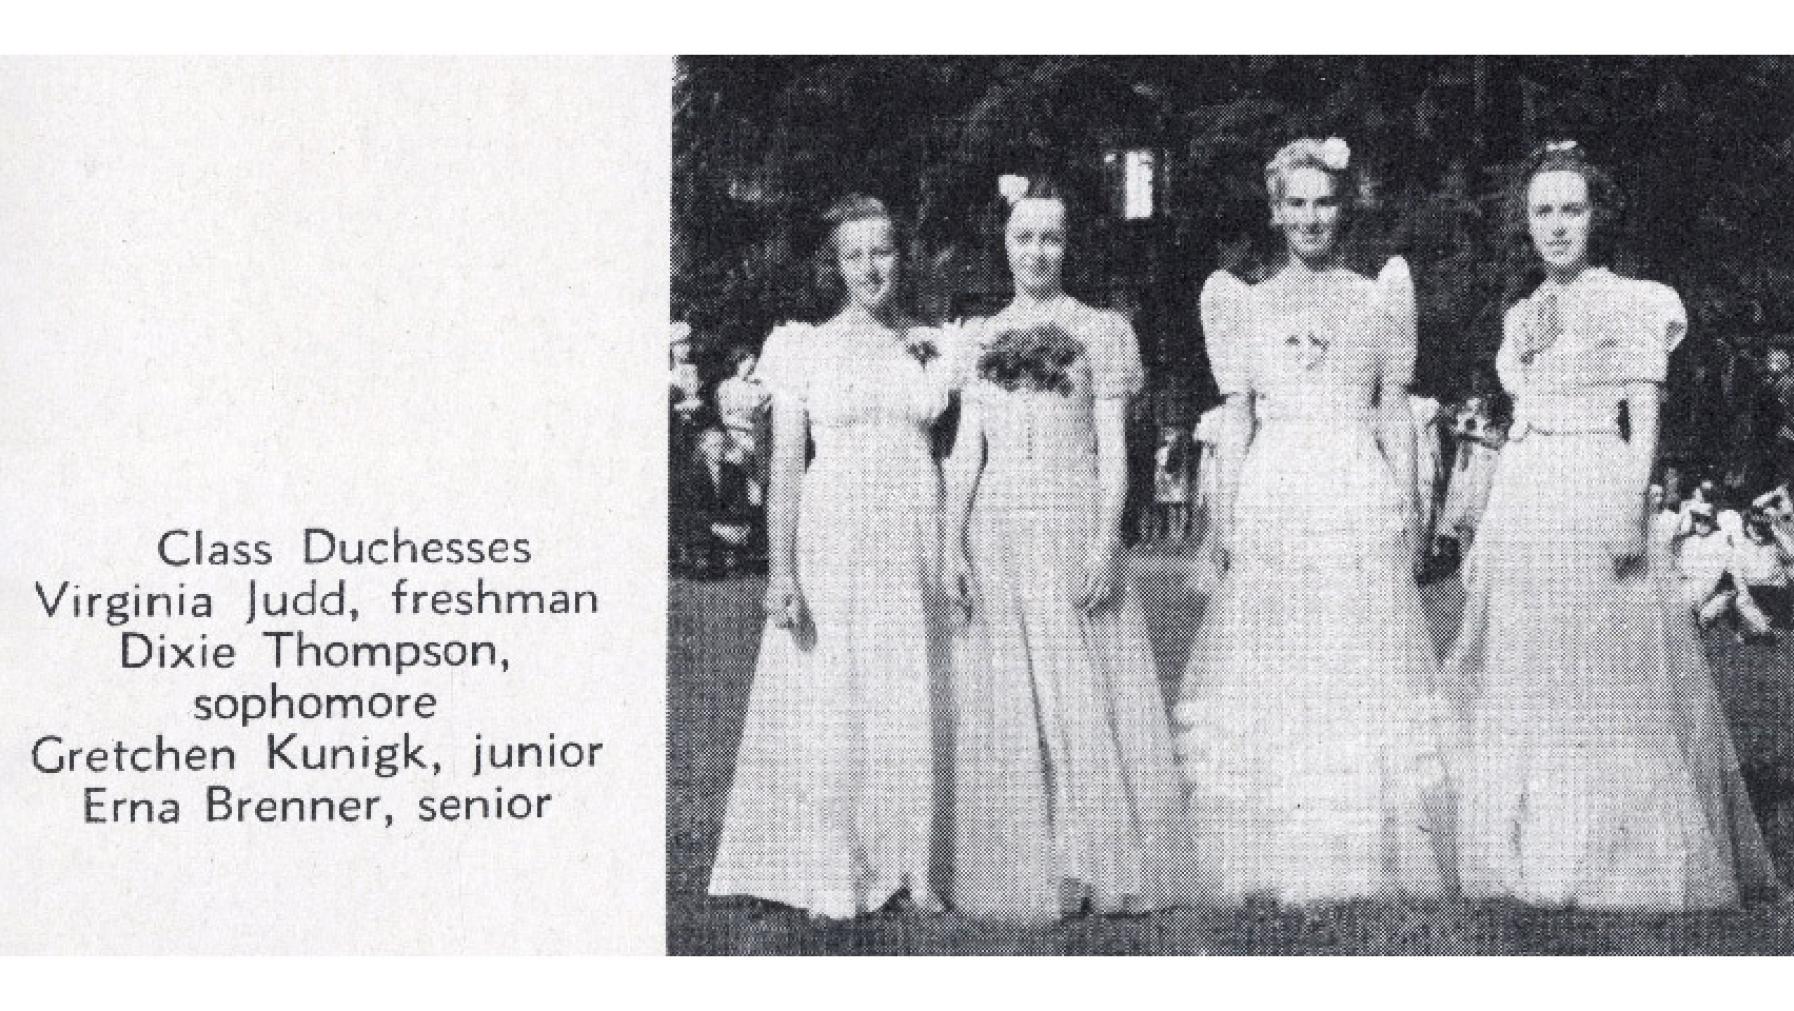 Page from Tamwanas showing the class duchesses of 1939, including future Olympic medalist Gretchen Kunigk Fraser ’41.